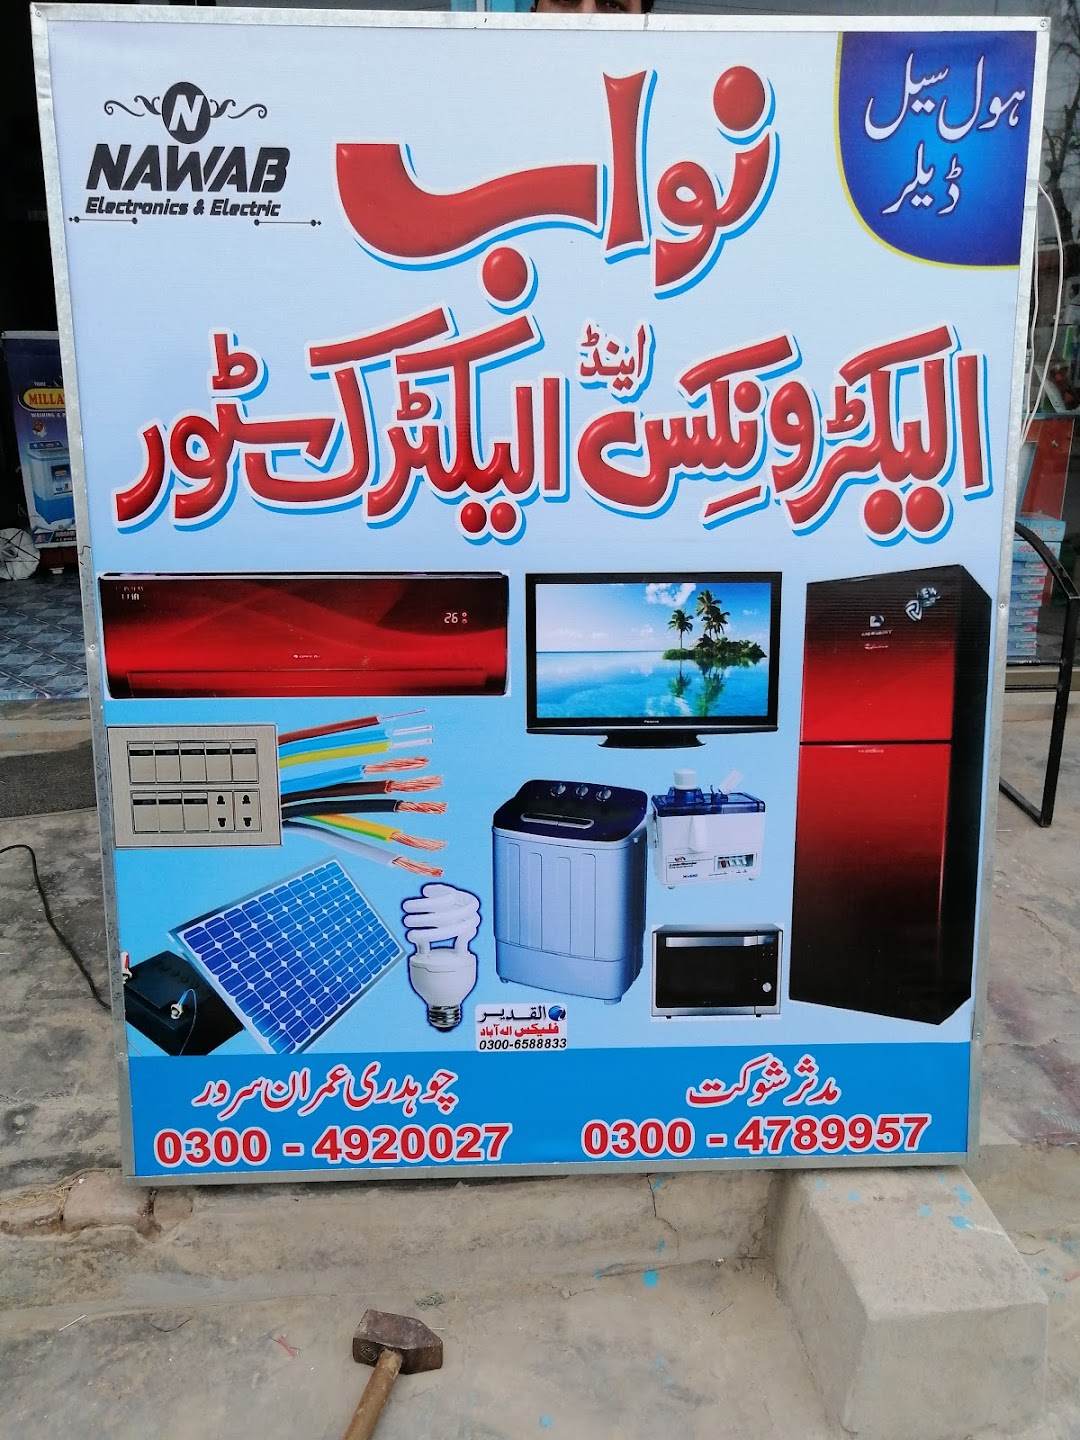 Nawab electronics and electric store